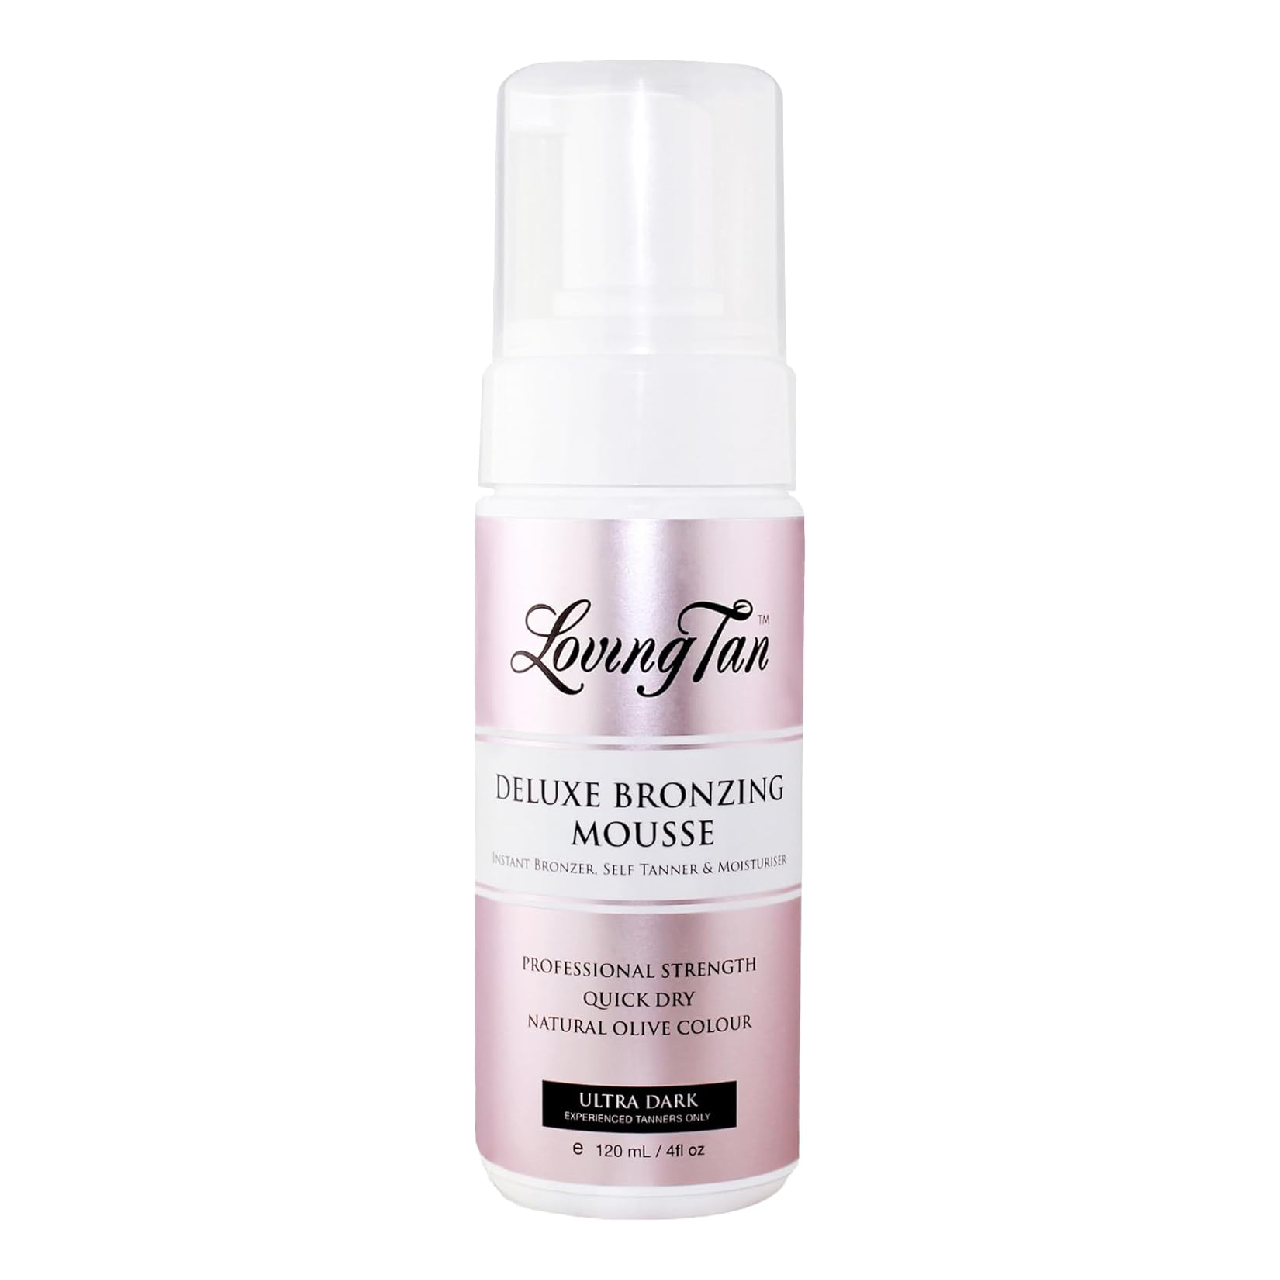 Bottle of Loving Tan Deluxe Bronzing Mousse displayed on a pure white background.